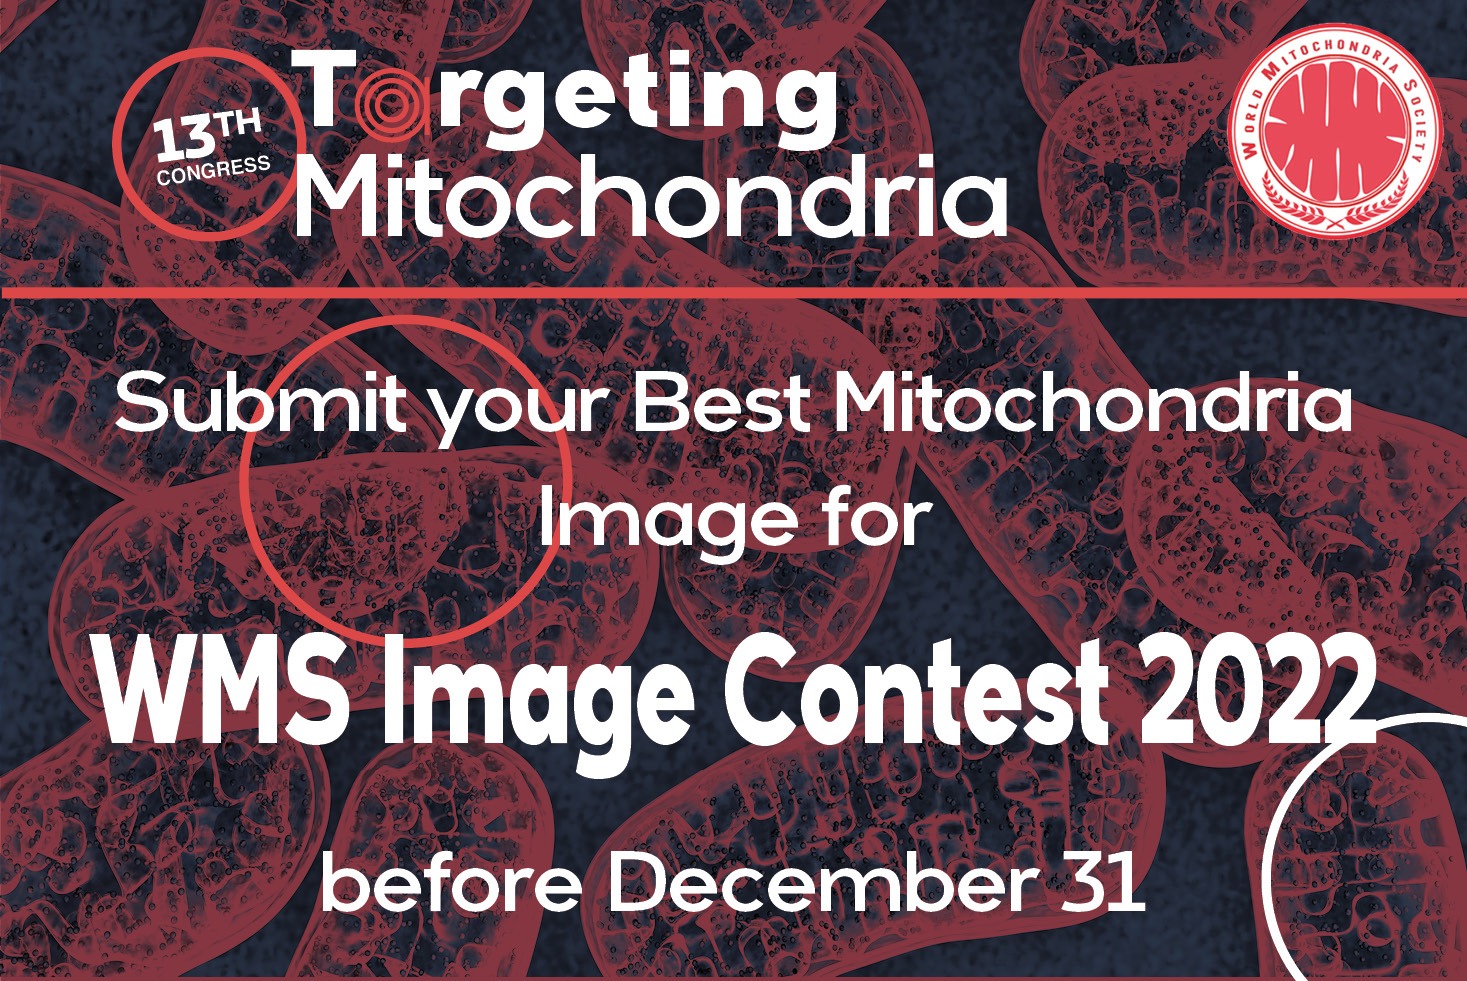 Nominations for The Best Mitochondria Image 2022